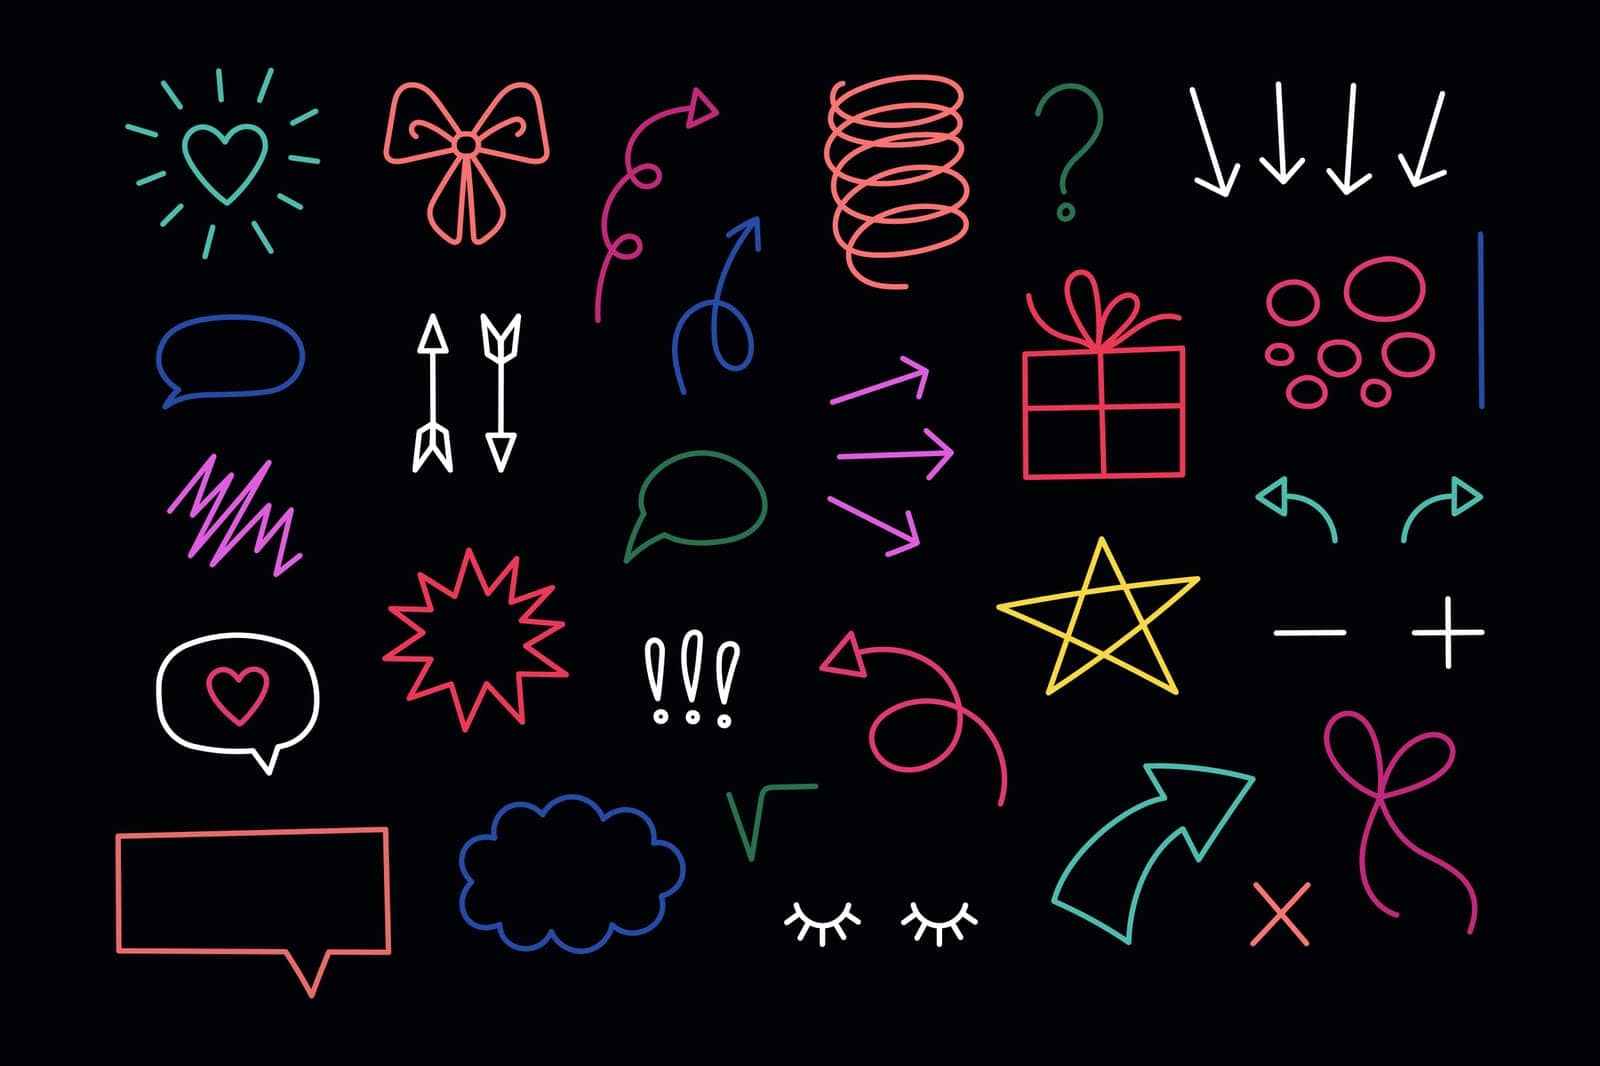 Hand drawn doodle elements set. Dark theme. Cartoon illustrations on black background. Neon elements. Hand drawn Abstract shapes. Doodles of hearts, ribbons, bows, stars, gifts, arrows.